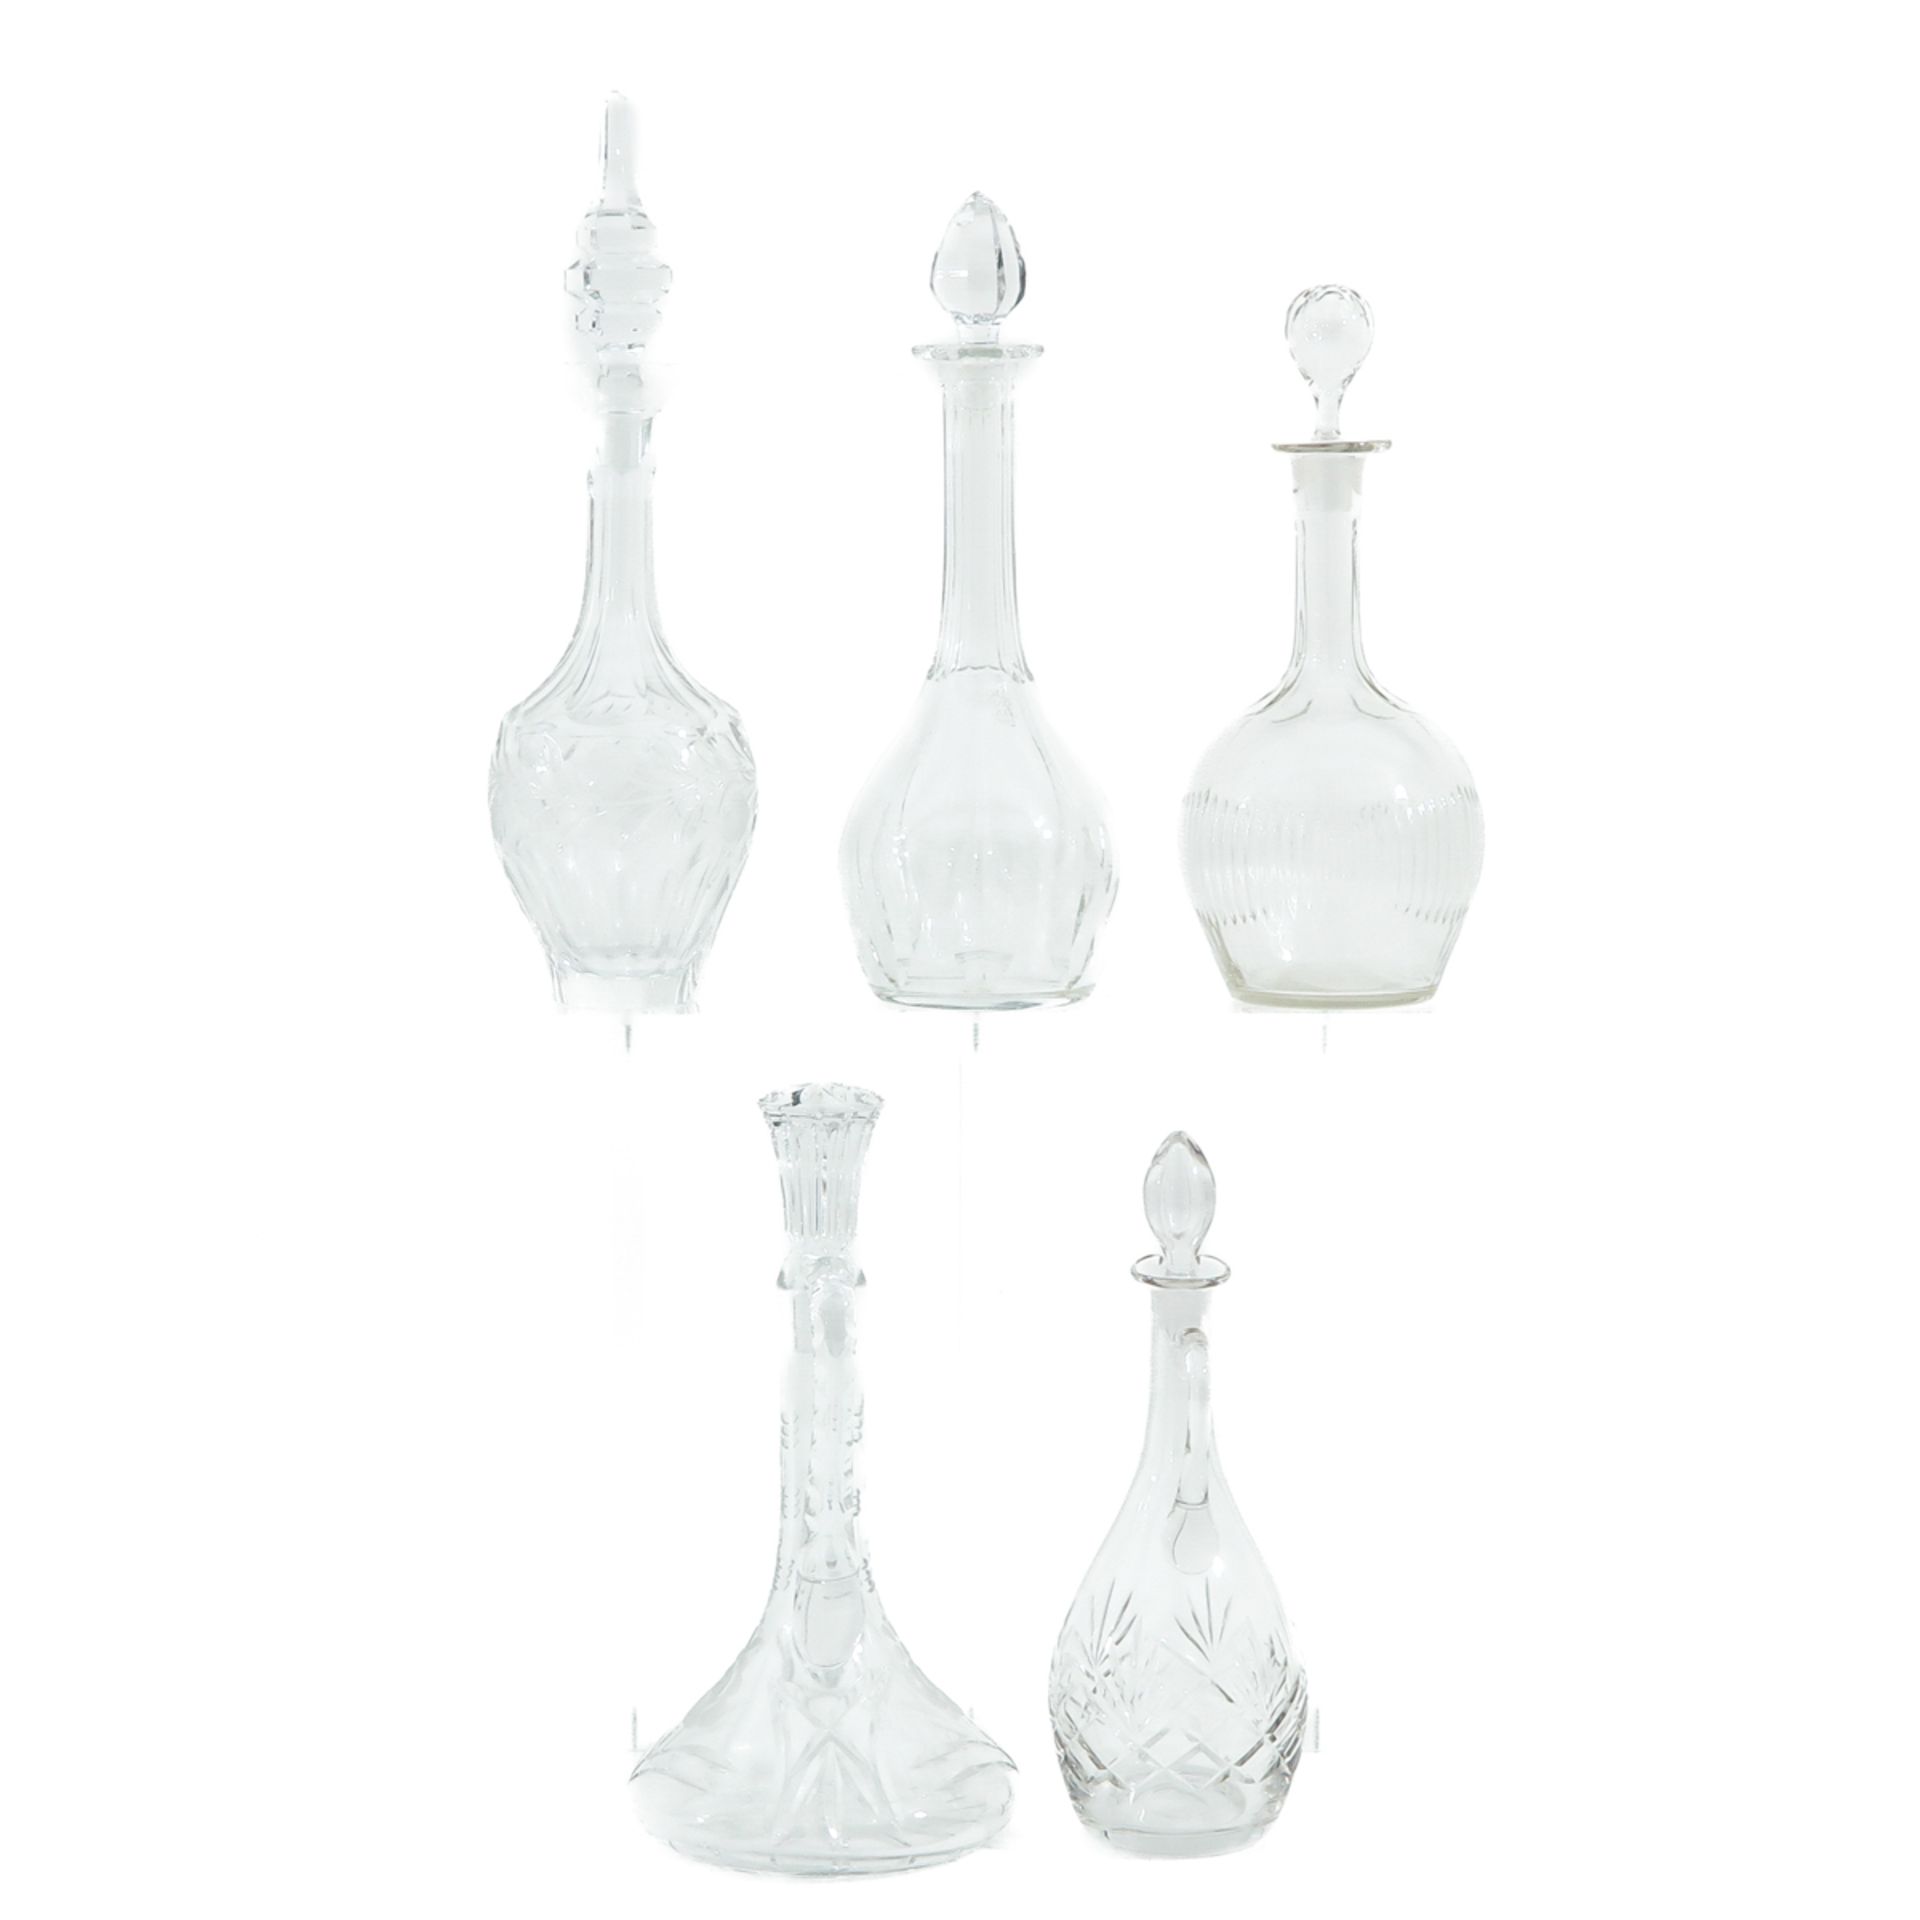 A Collection of Decanters - Image 2 of 10